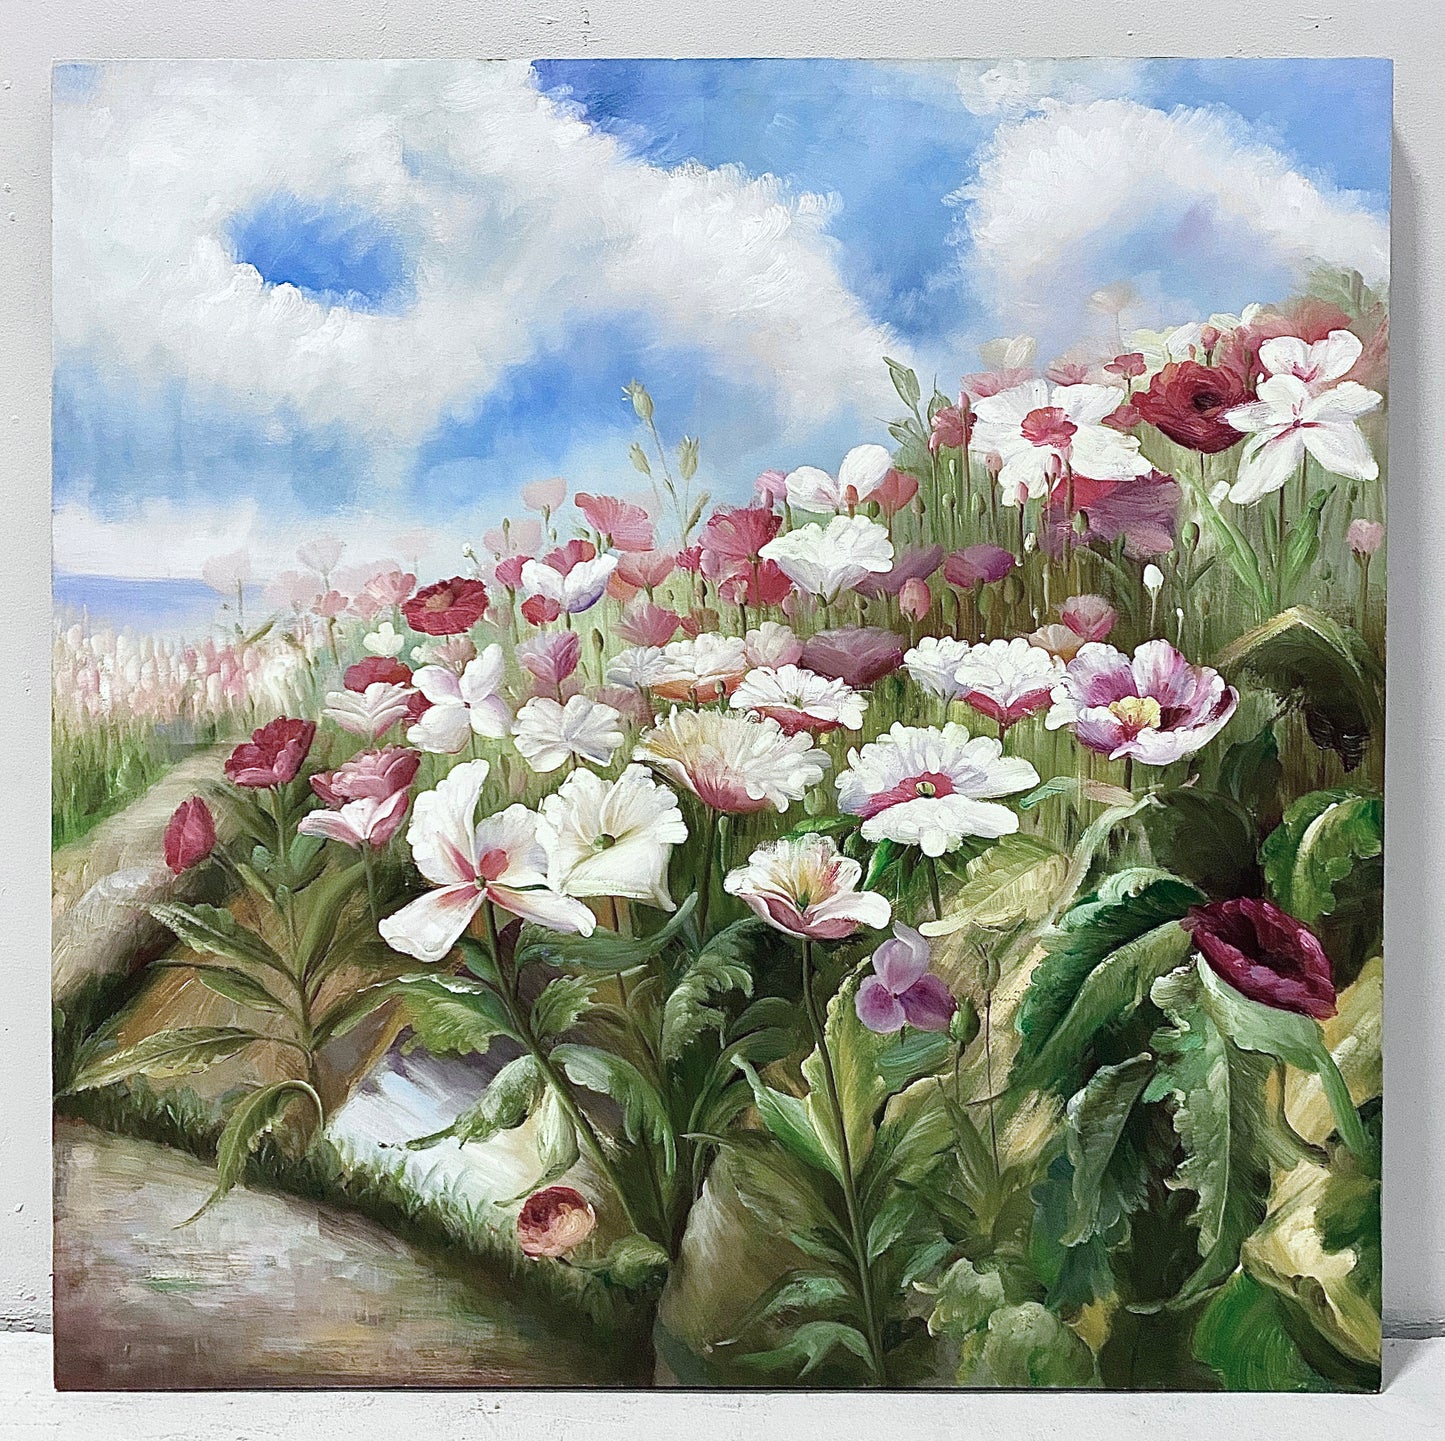 40"x40" Floral Painting on Canvas